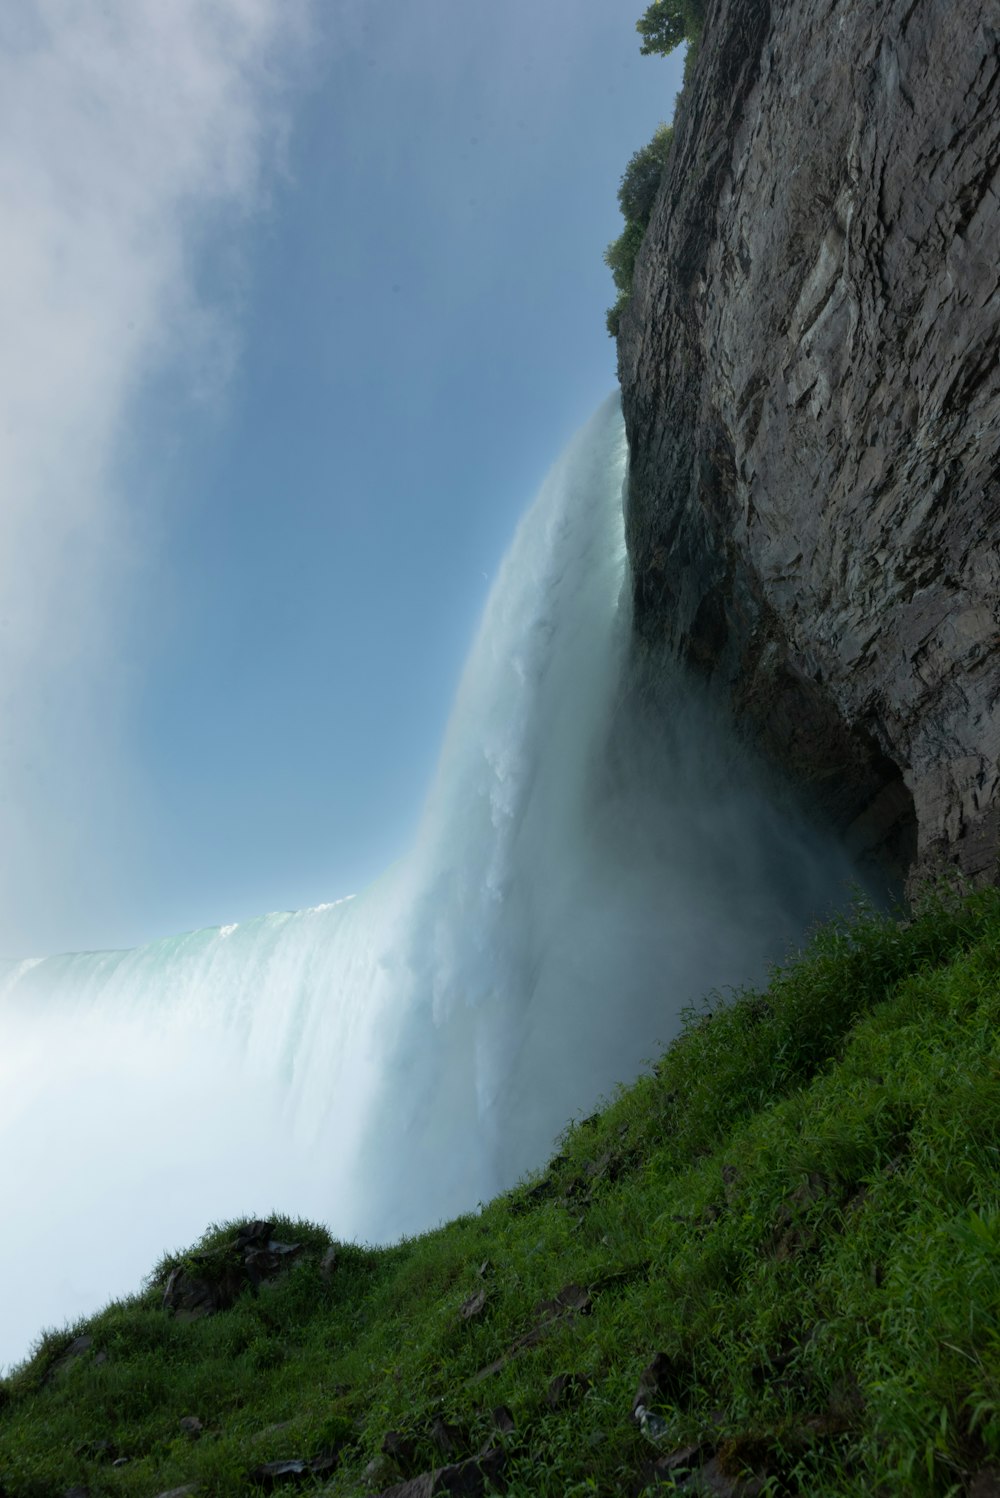 a very tall waterfall with a very steep side